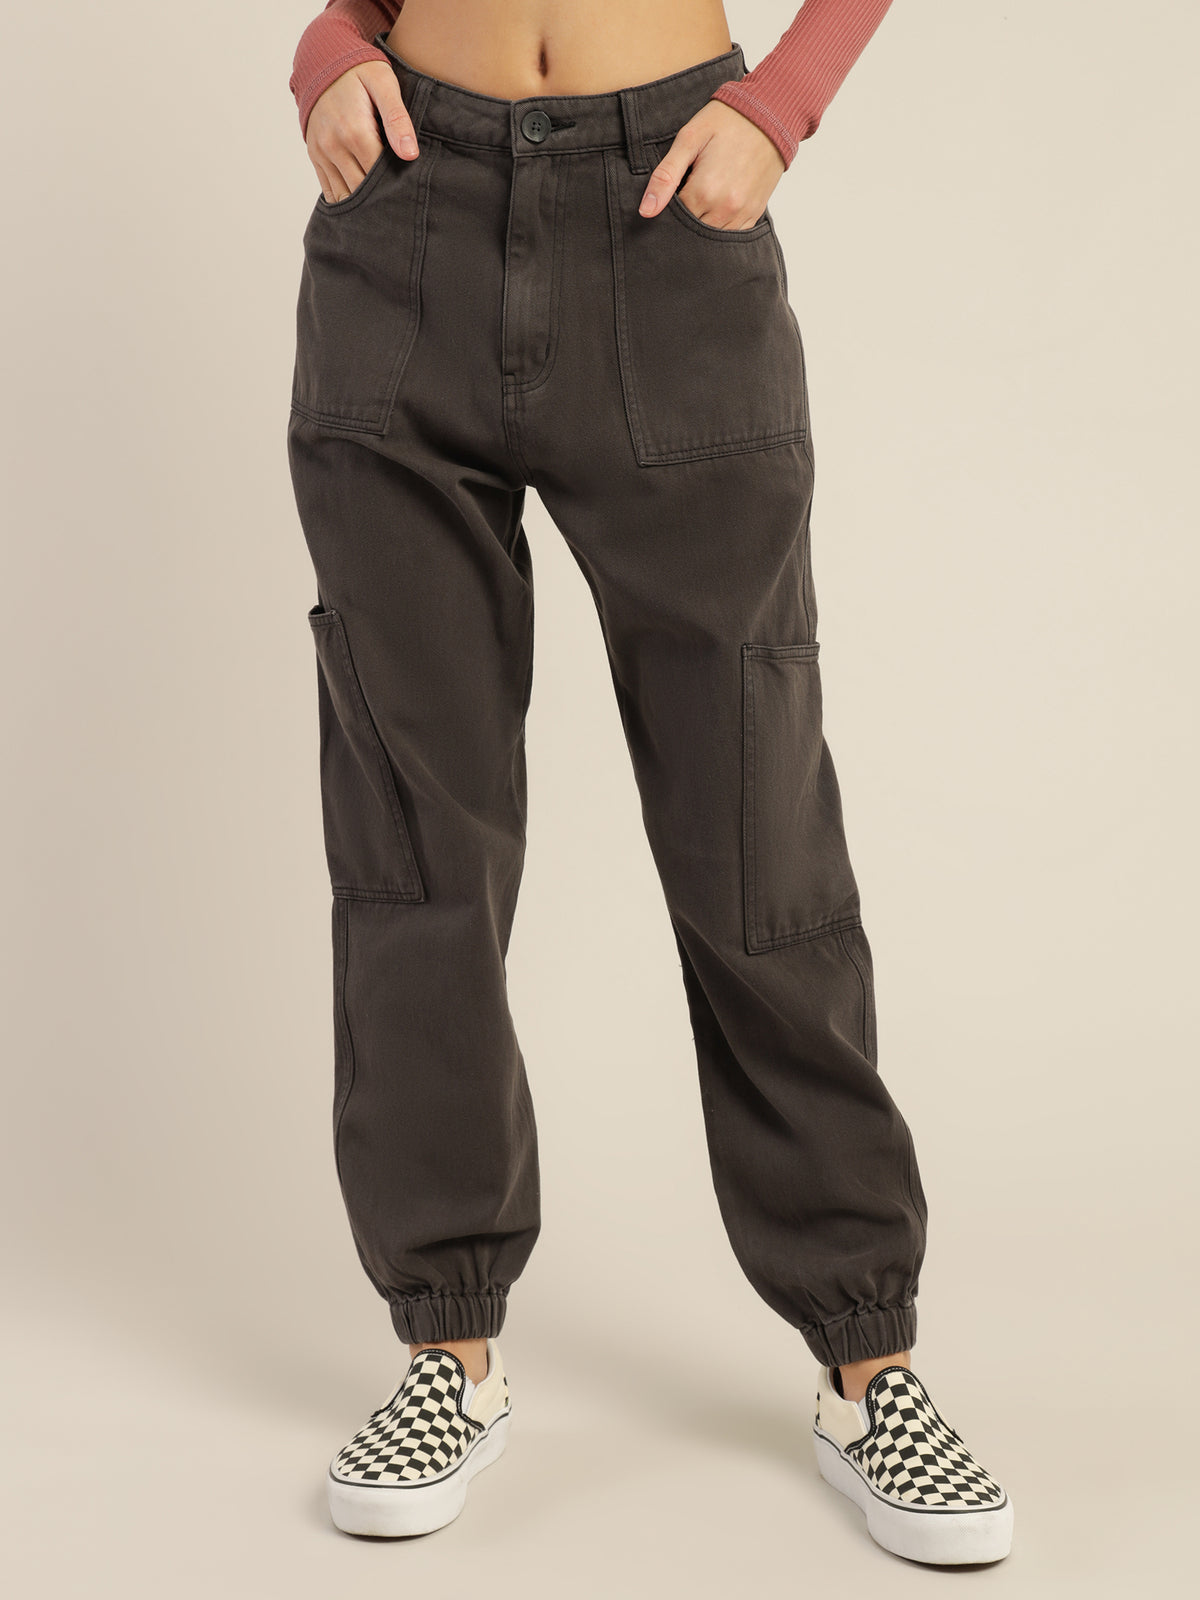 Mia Cargo Jogger Pants in Washed Black